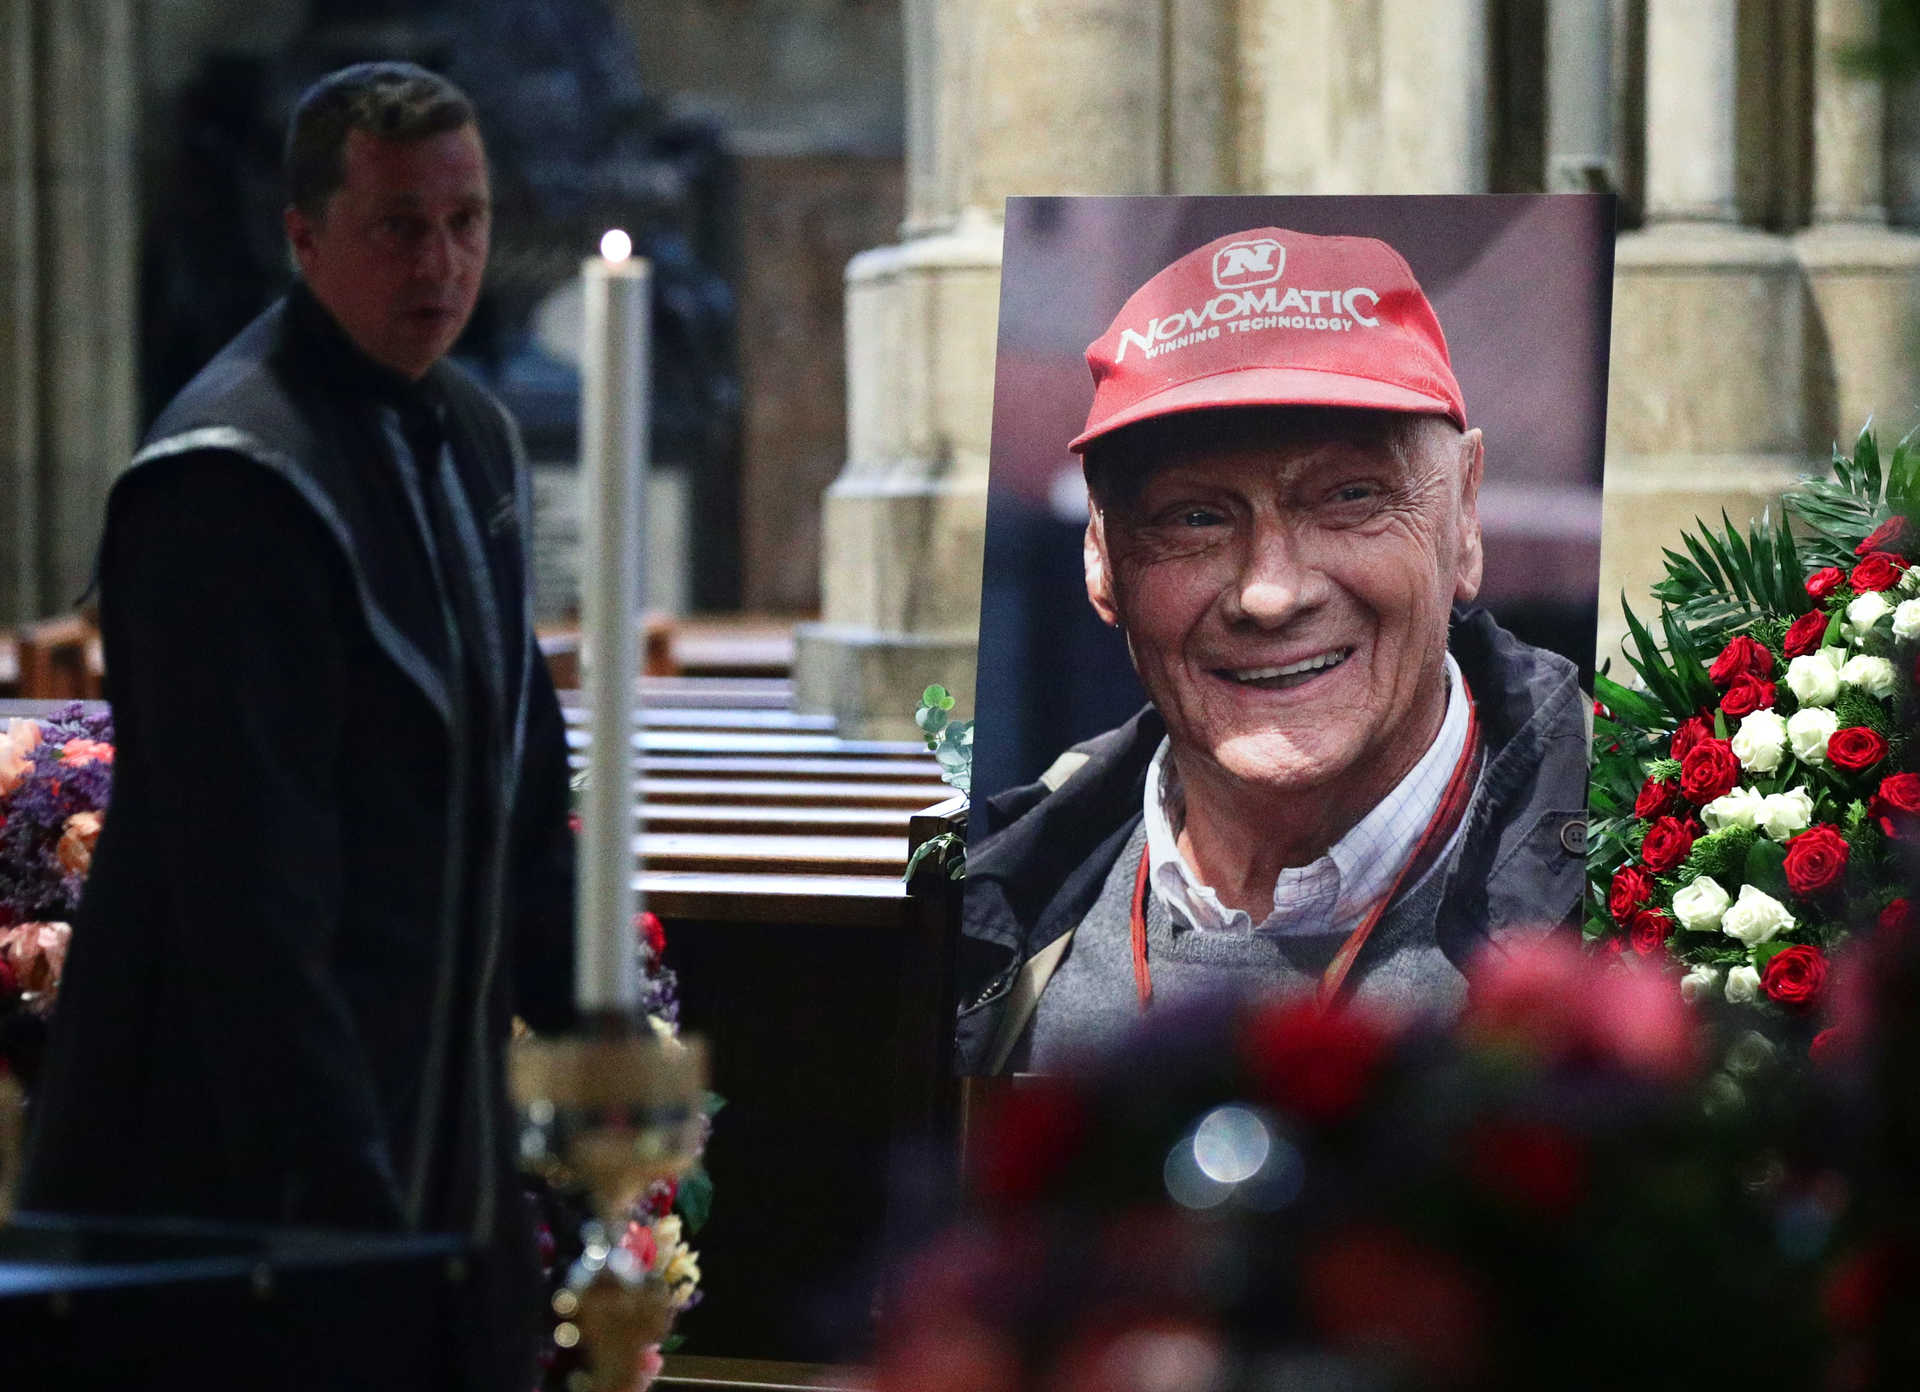 The coffin of Niki Lauda arrives at St Stephen’s cathedral in Vienna